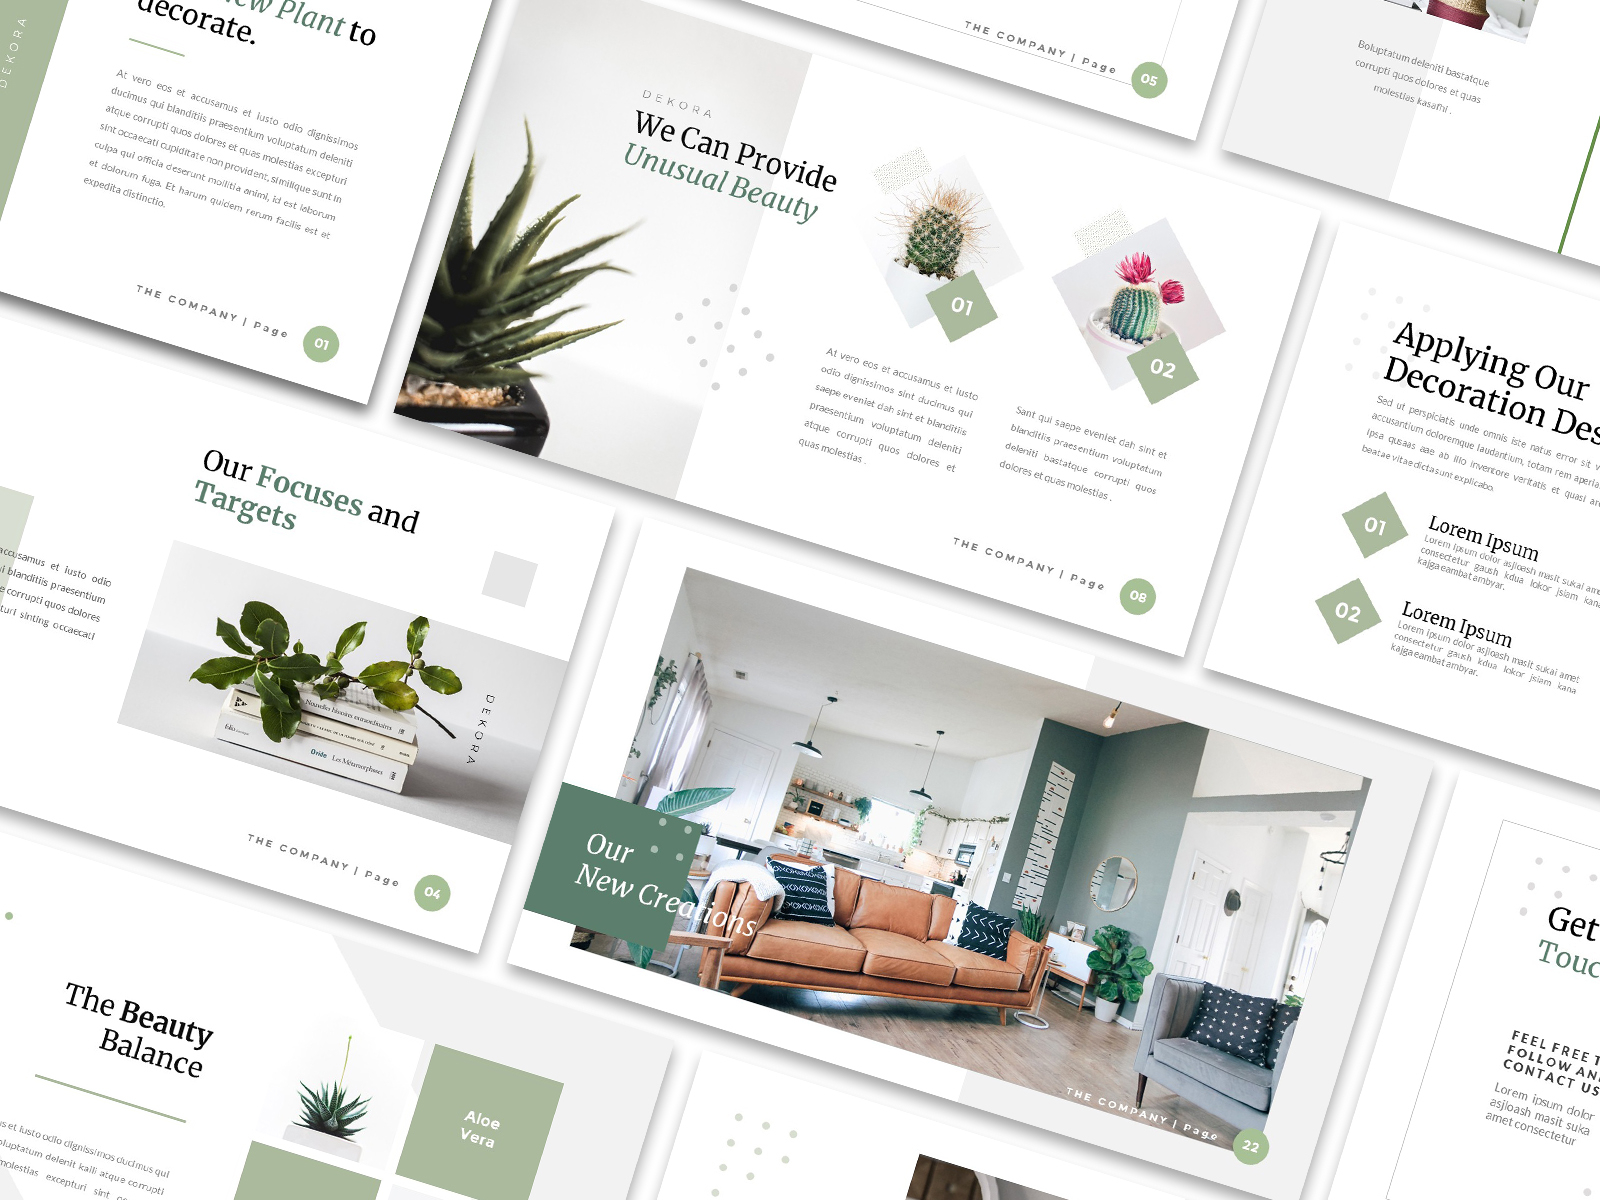 DEKORA - Clean Decoration Presentation Template by Robby Fathur on Dribbble